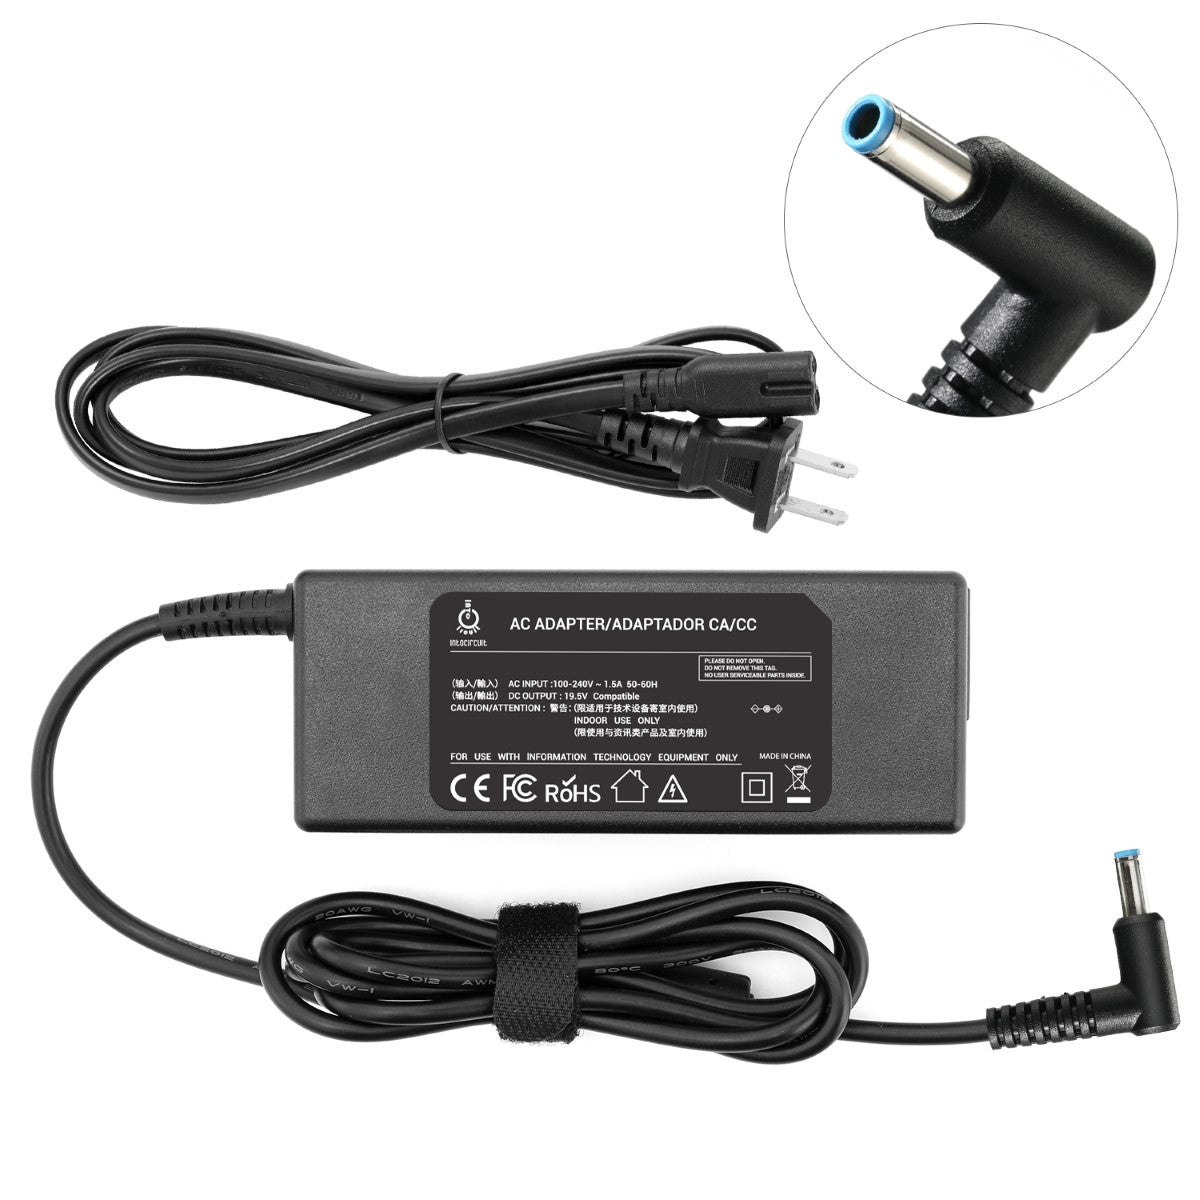 AC Adapter Charger for HP Pavilion 15-bk021nr Touch X360 Notebook